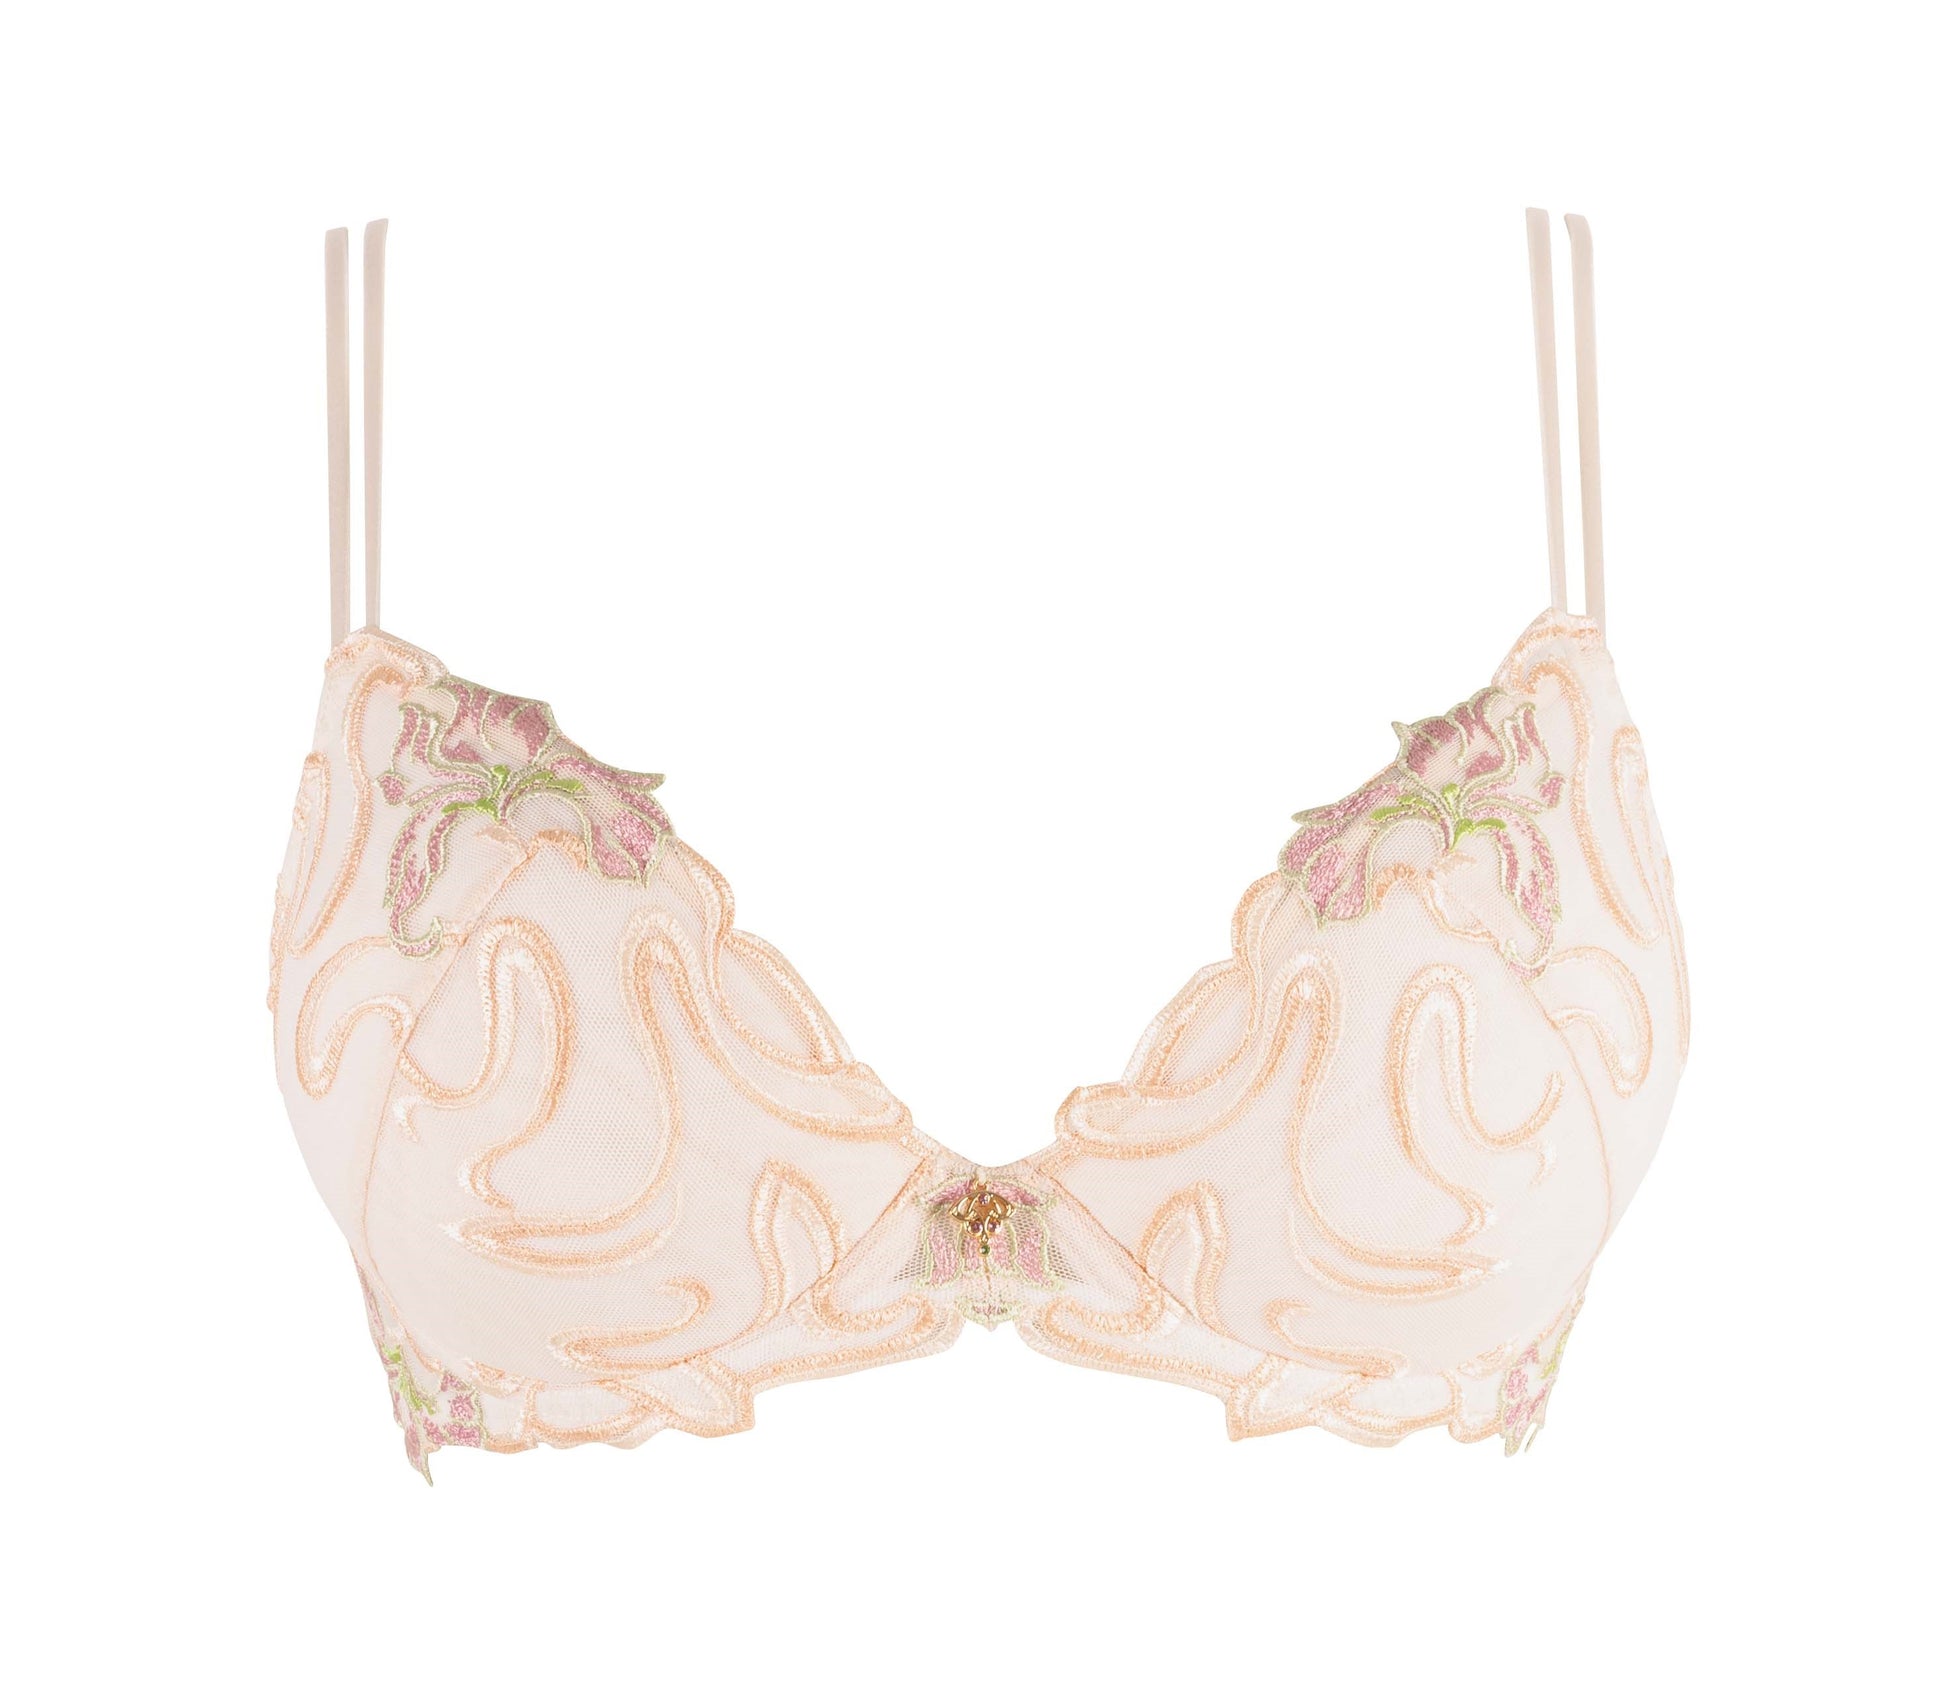 The Horta line's push-up bra is inspired by the varied architecture of Victor Horta, a renowned Belgian architect renowned for his involvement in the Art Nouveau movement in Belgium. 